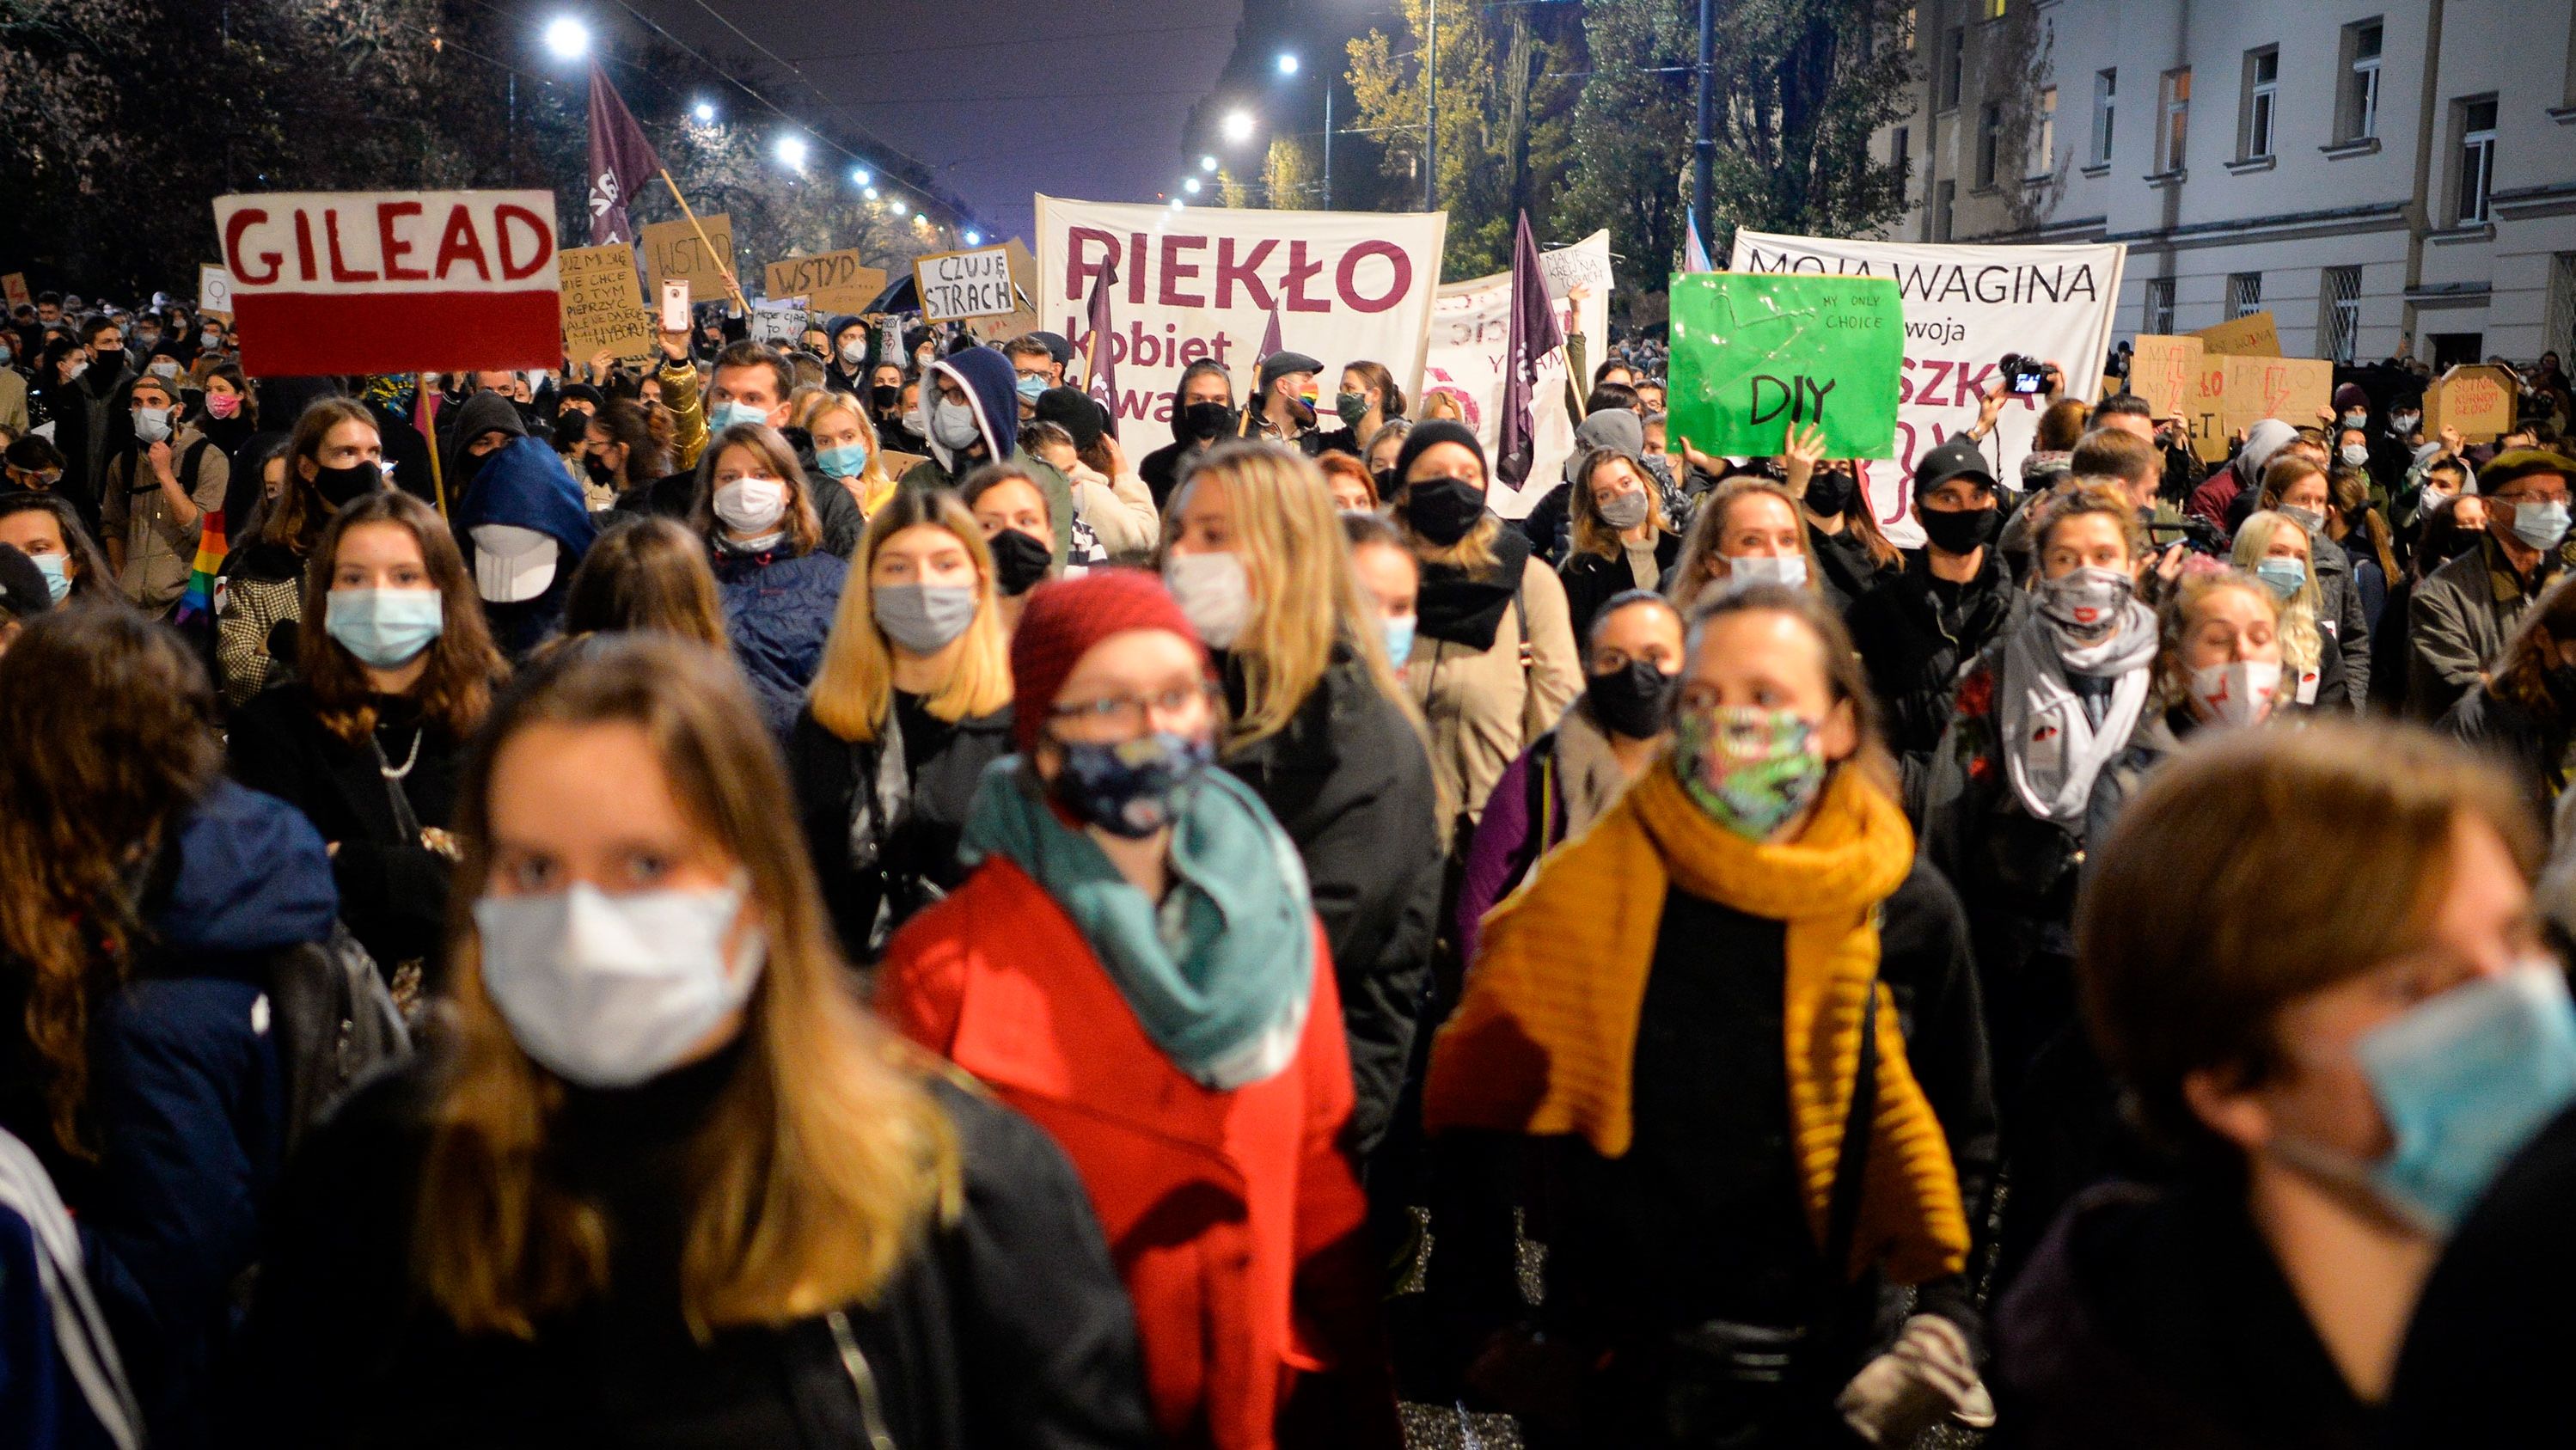  Activists hold placards as they protest in Warsaw against the abortion ban.